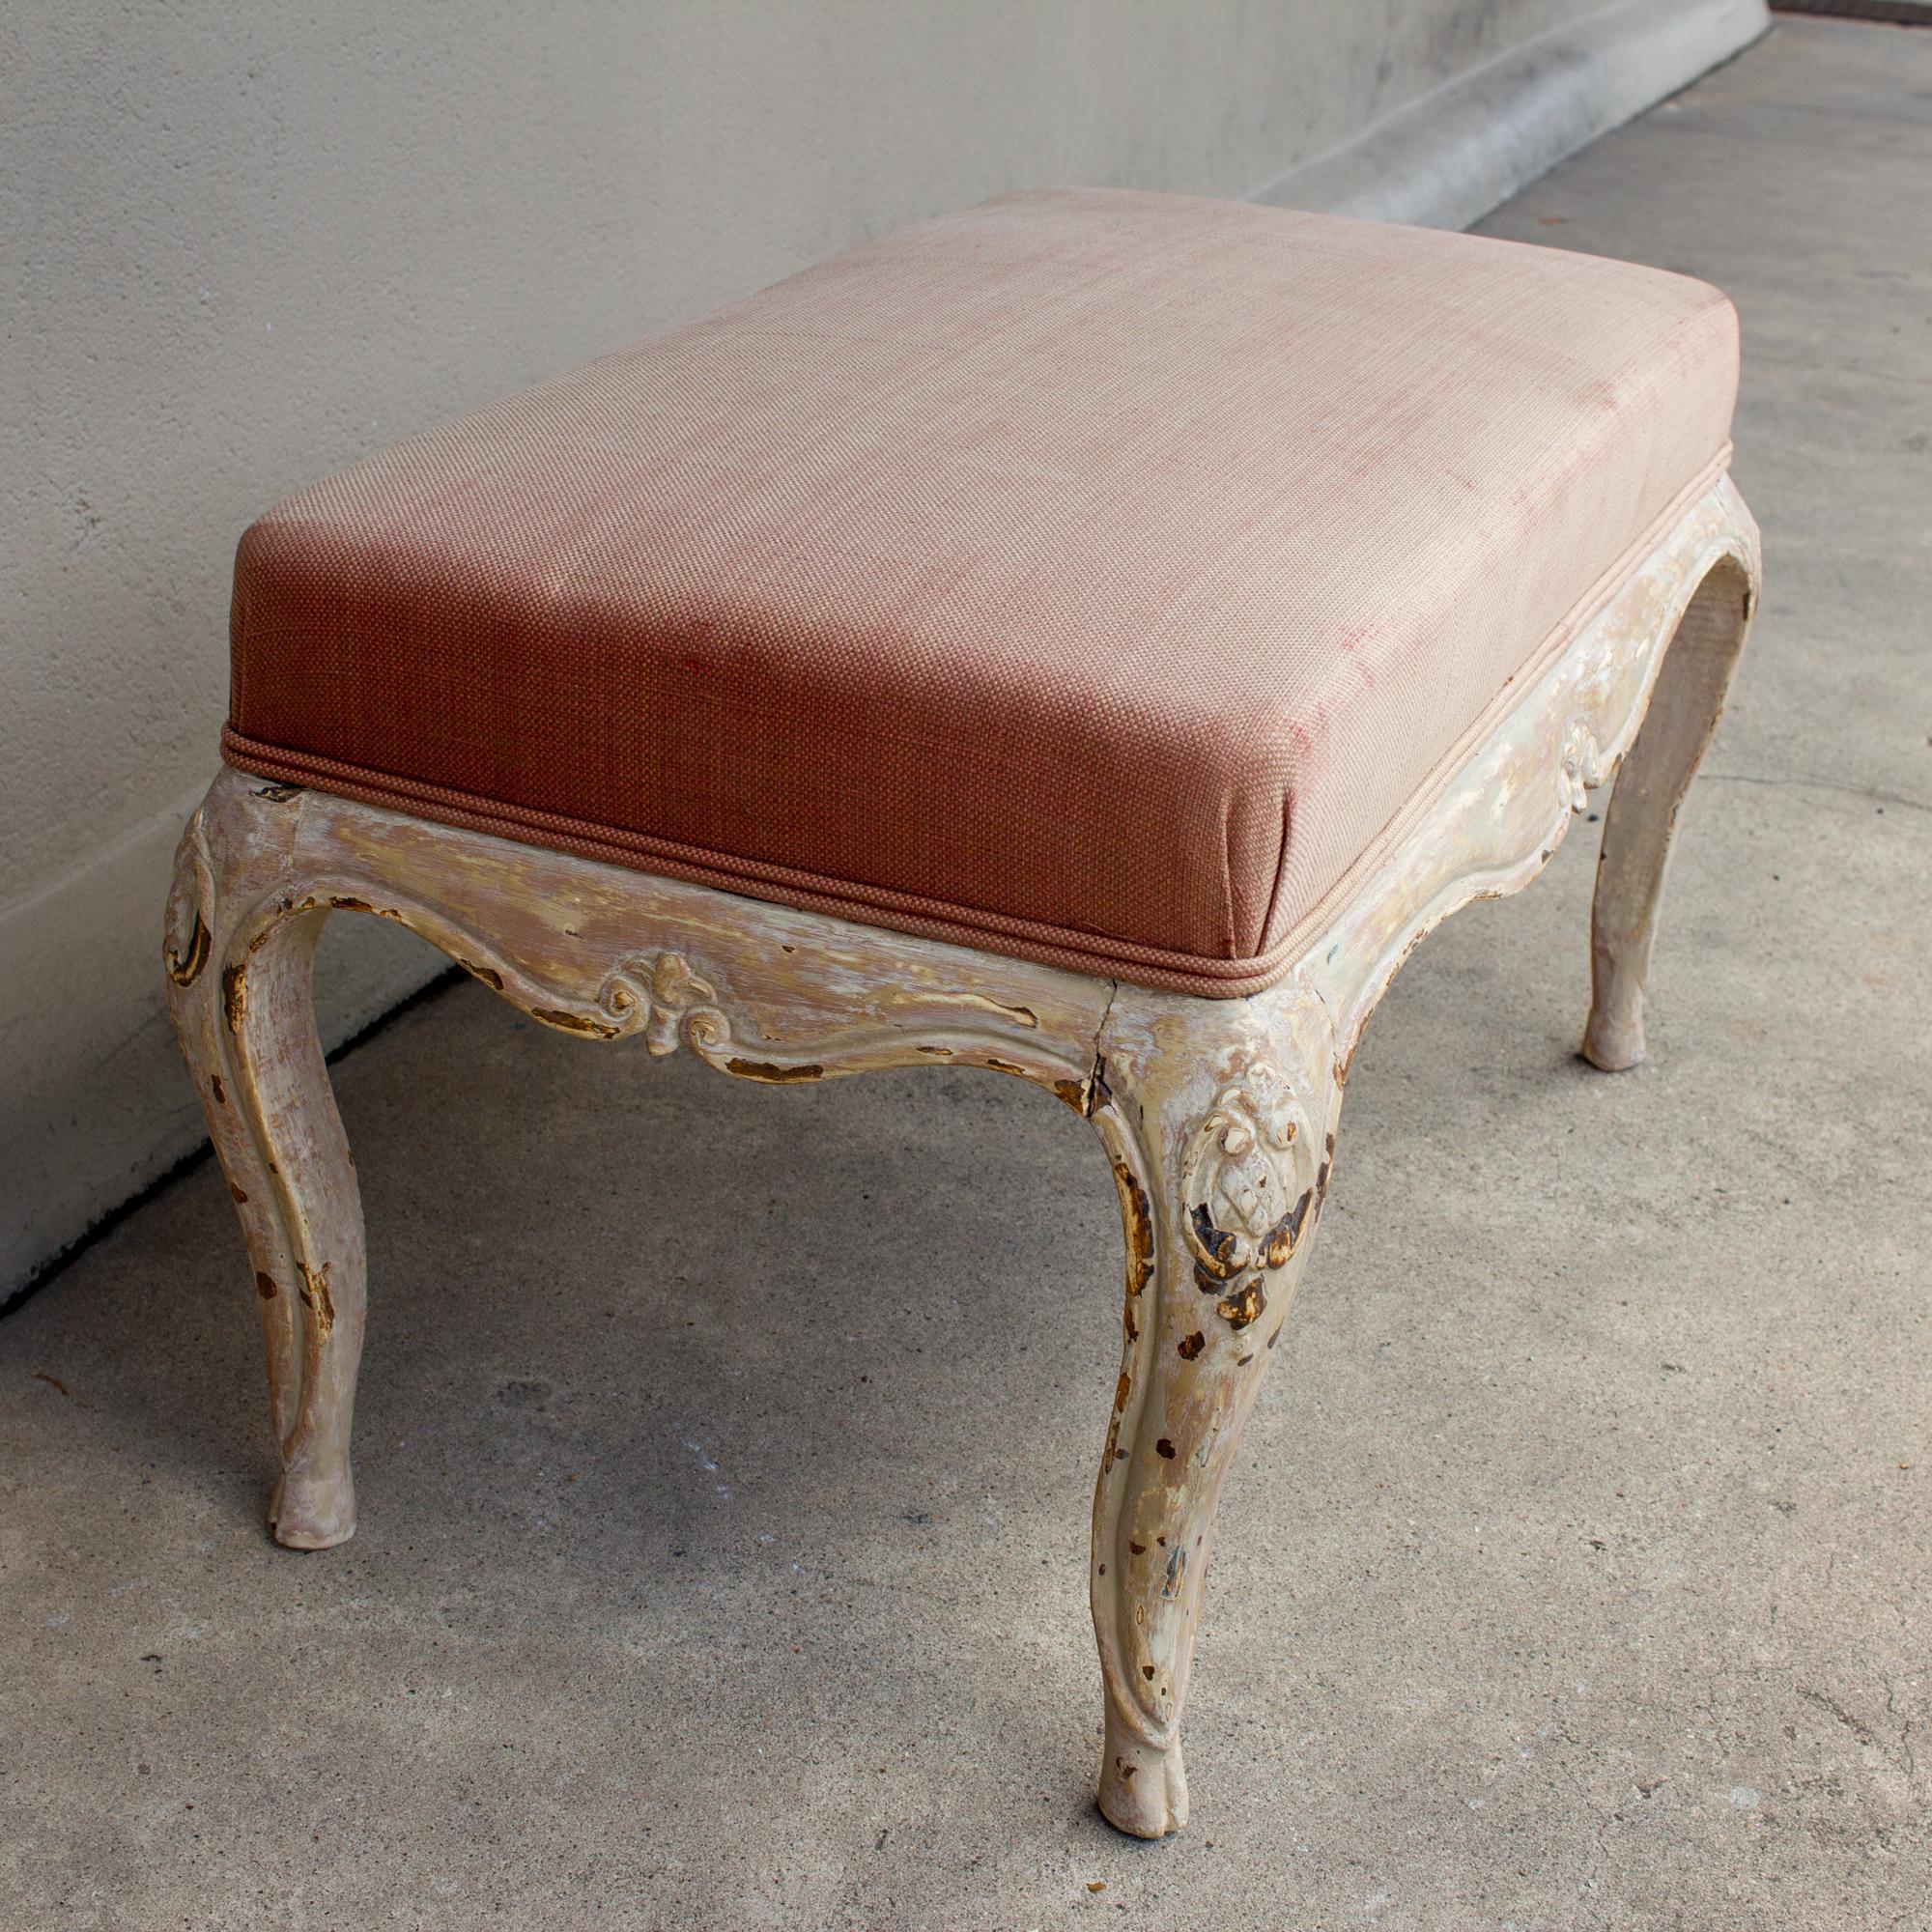 Restauration Antique French Carved Bench with Distressed Painted Finish, circa 1820